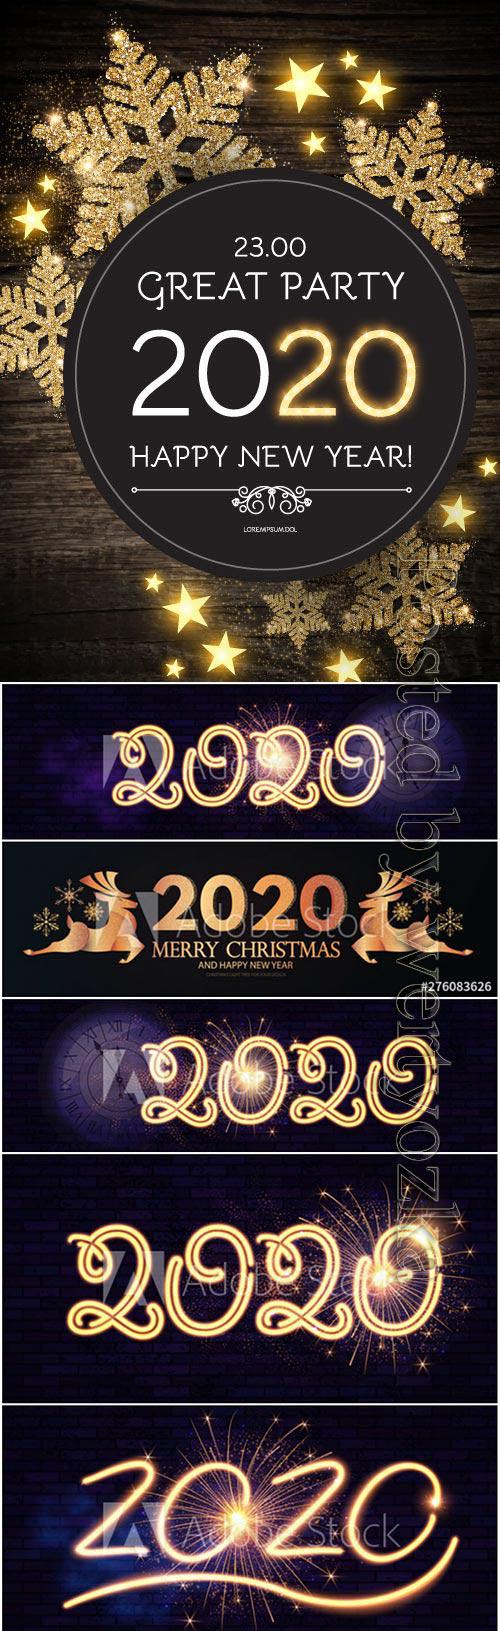 2020 Christmas and New Year vector backgrounds with golden